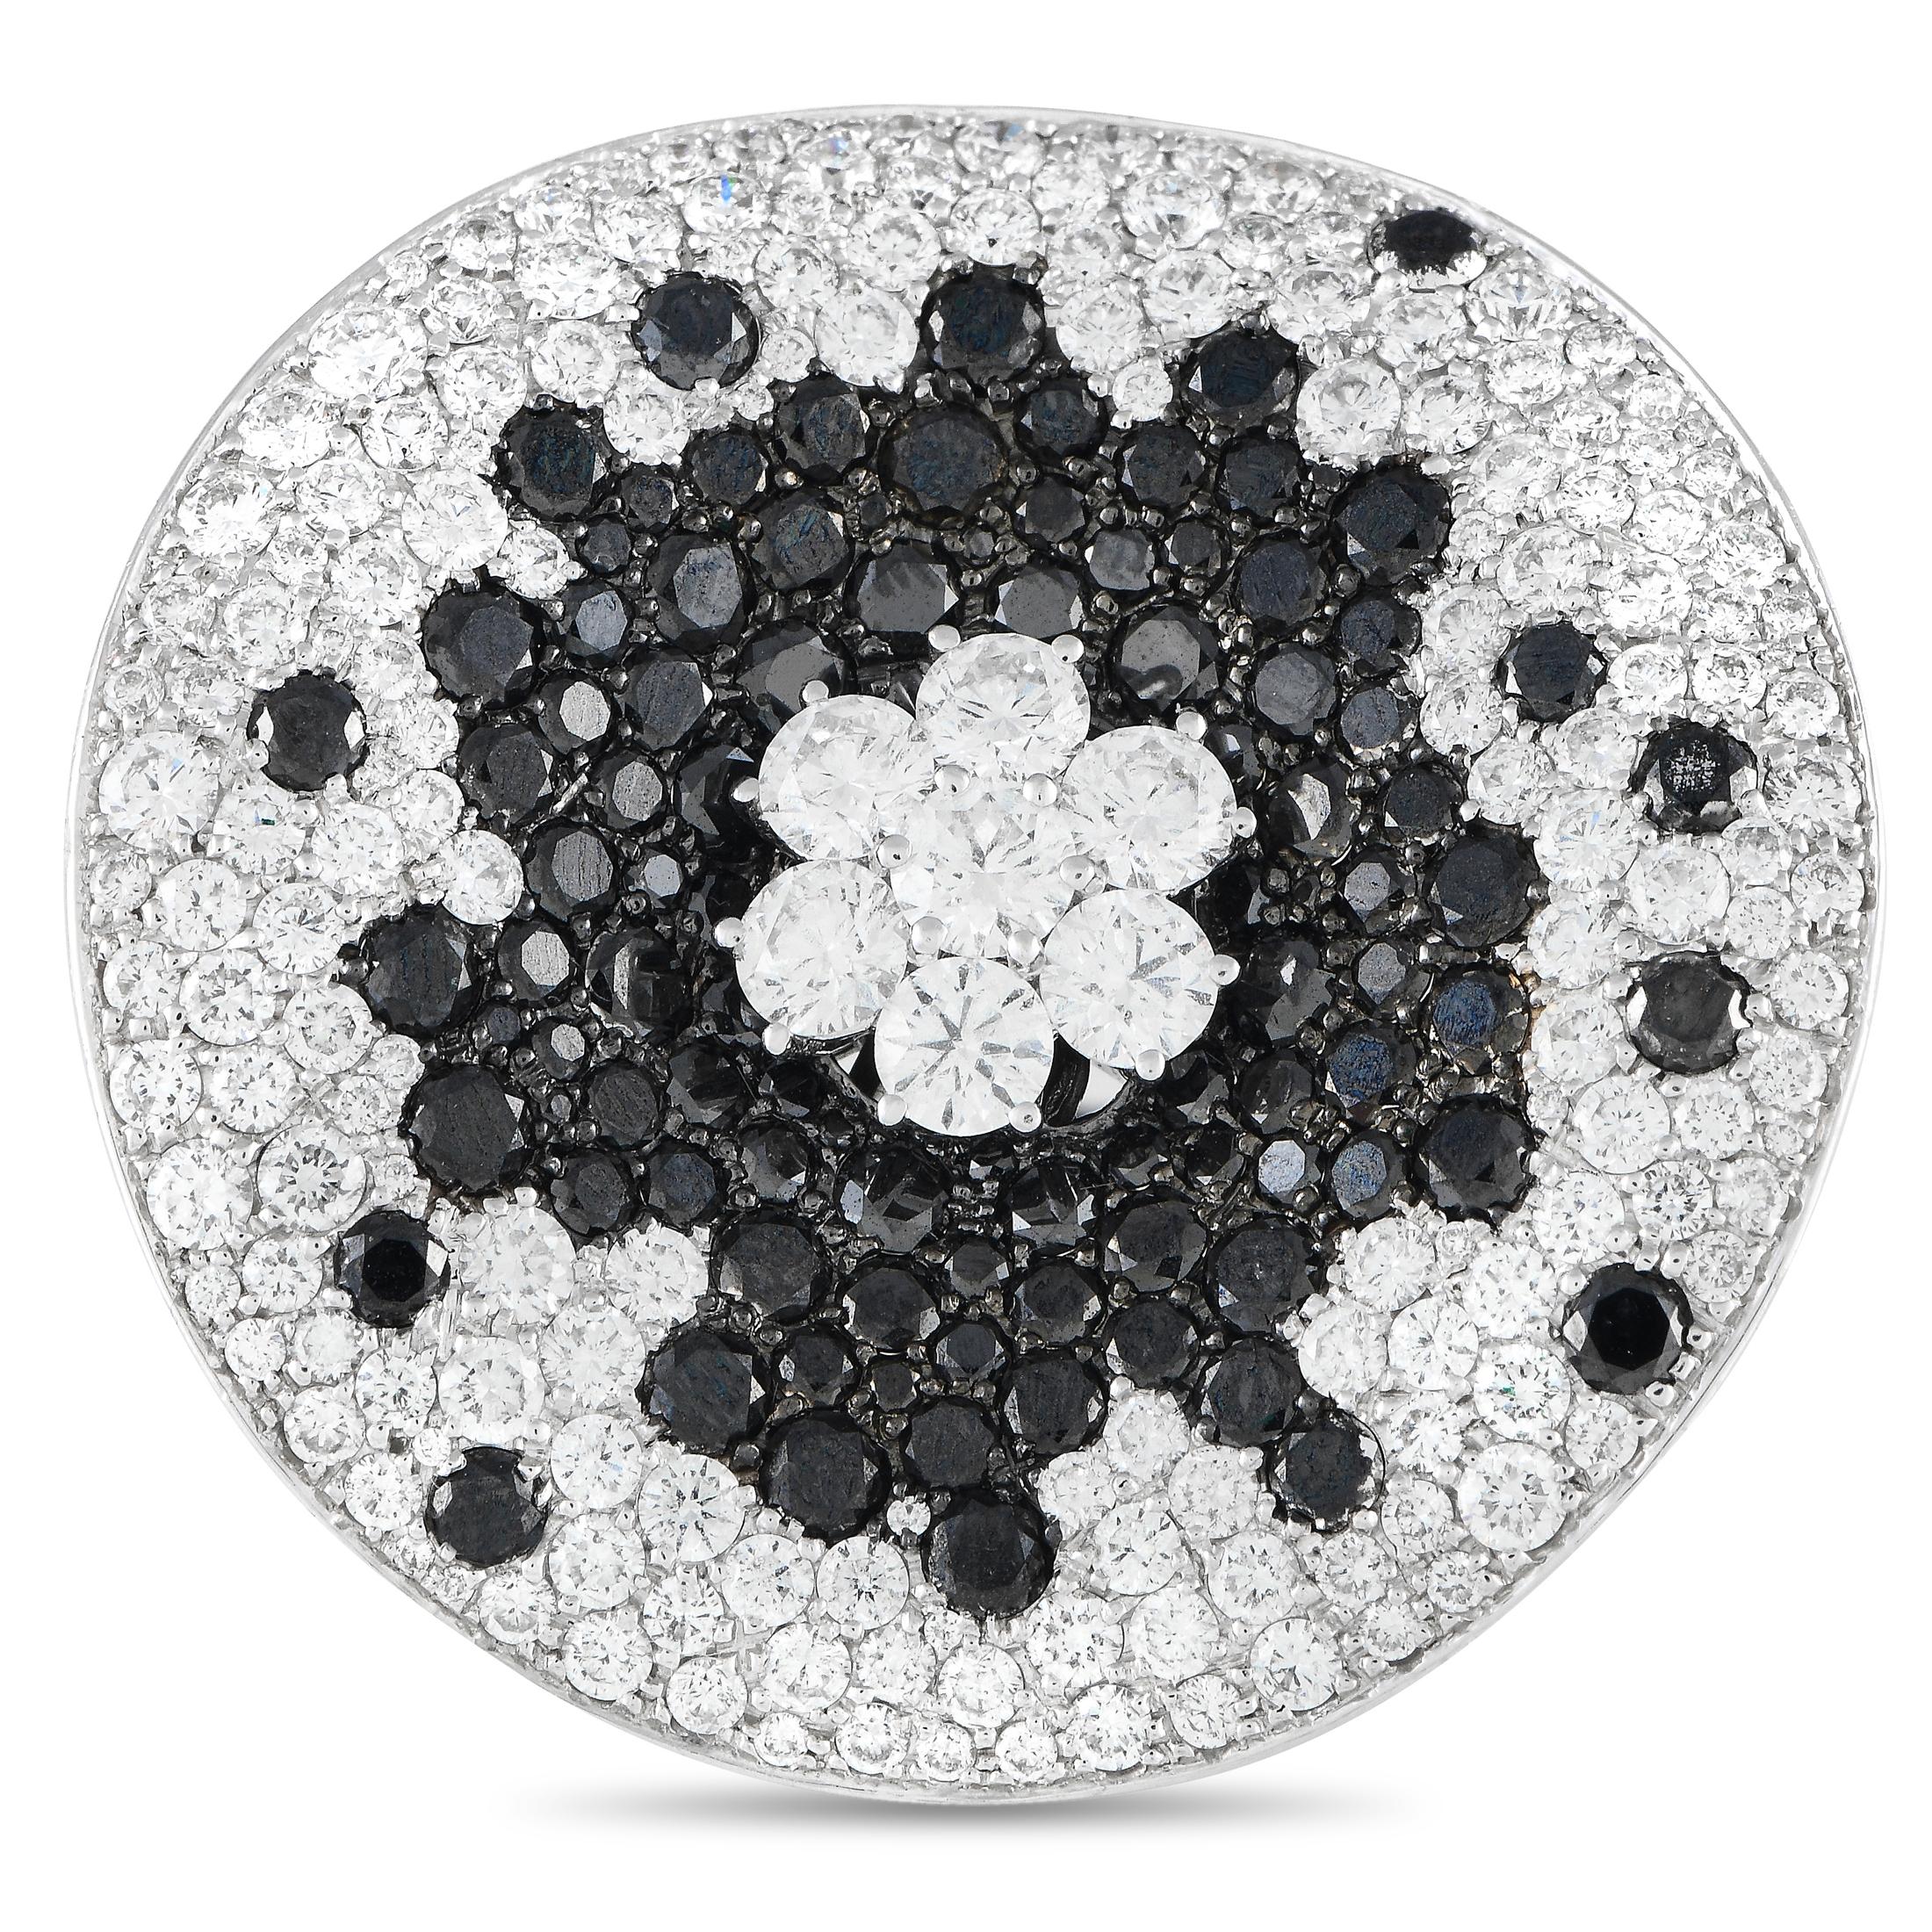 This delightful display ushers in visions of summer with a divine blend of white and black diamonds. 4.69ct white diamonds are given sharp contrast against sprinklings of 11.88ct black diamonds across the thin wafer of 18K white gold.